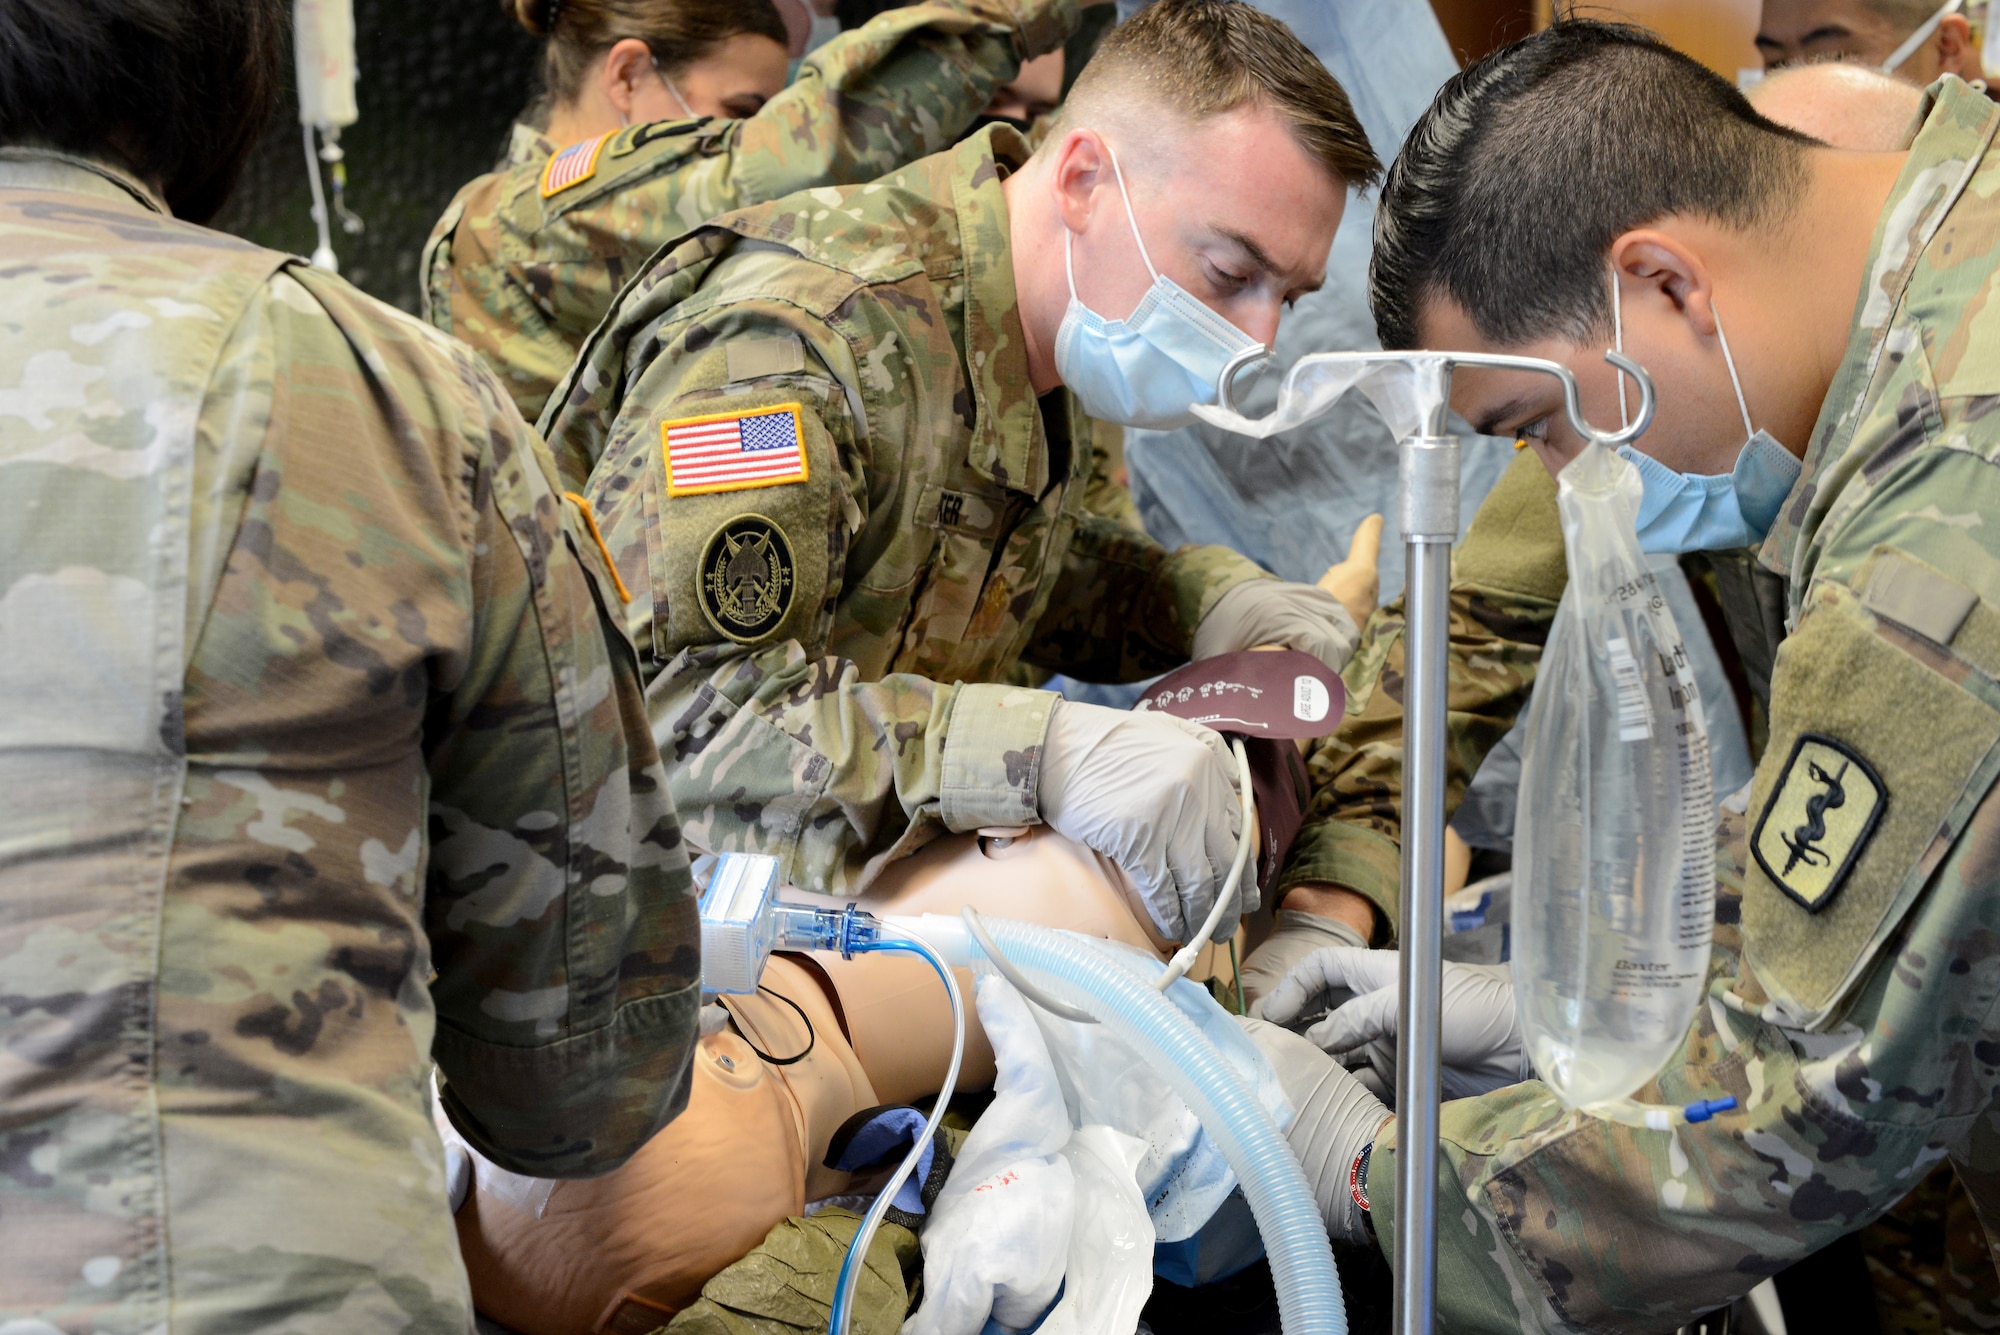 U.S. Army Maj. James Foster, 67th Forward Resuscitative Surgical Team orthopedic surgeon, left, and Spc. Jonathan Lopez, 67th FRST operating room technician, right, place a Hypothermia Prevention and Management Kit under the patient to prepare for transport during a training scenario at the Medical Simulation Training Center, Ramstein Air Base, June 19, 2020.